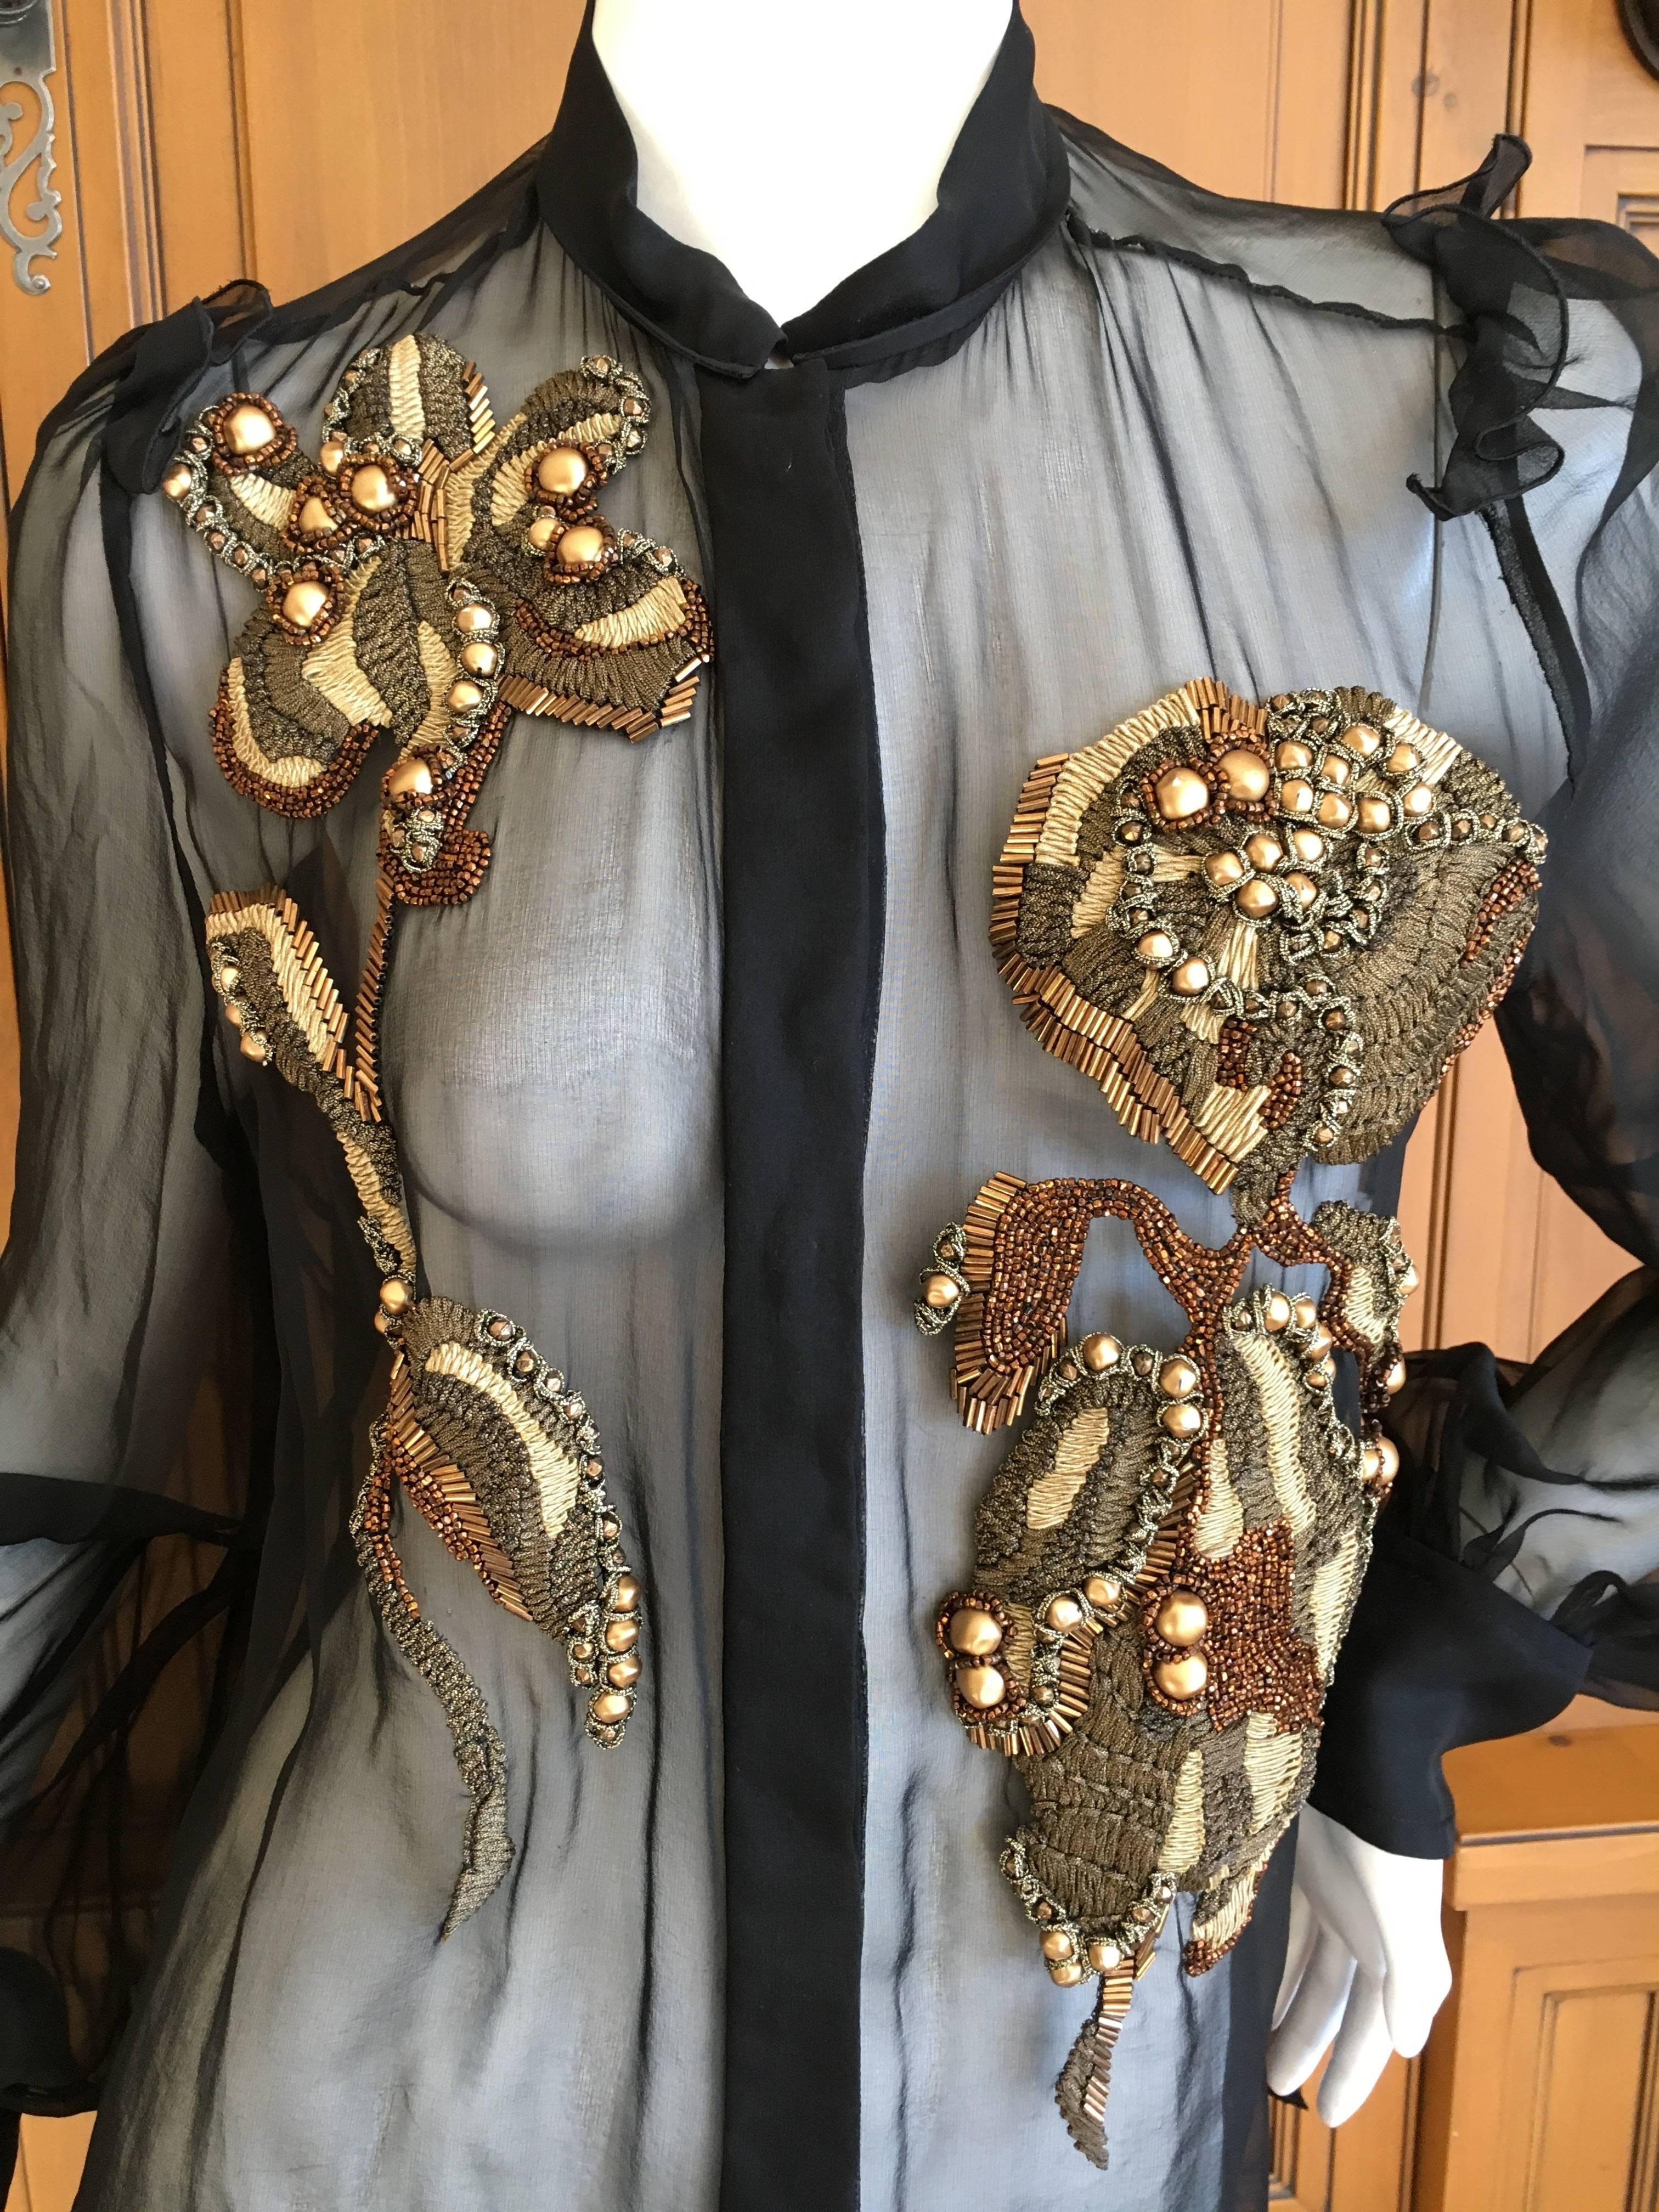 Yves Saint Laurent Sheer Blouse with Lesage Embellished Iris Flowers.
Iris were a repeated theme in YSL embellished jackets and tops, and this is a wonderful interpretation in gold threads, sequins and beads.
Absolutely exquisite workmanship from